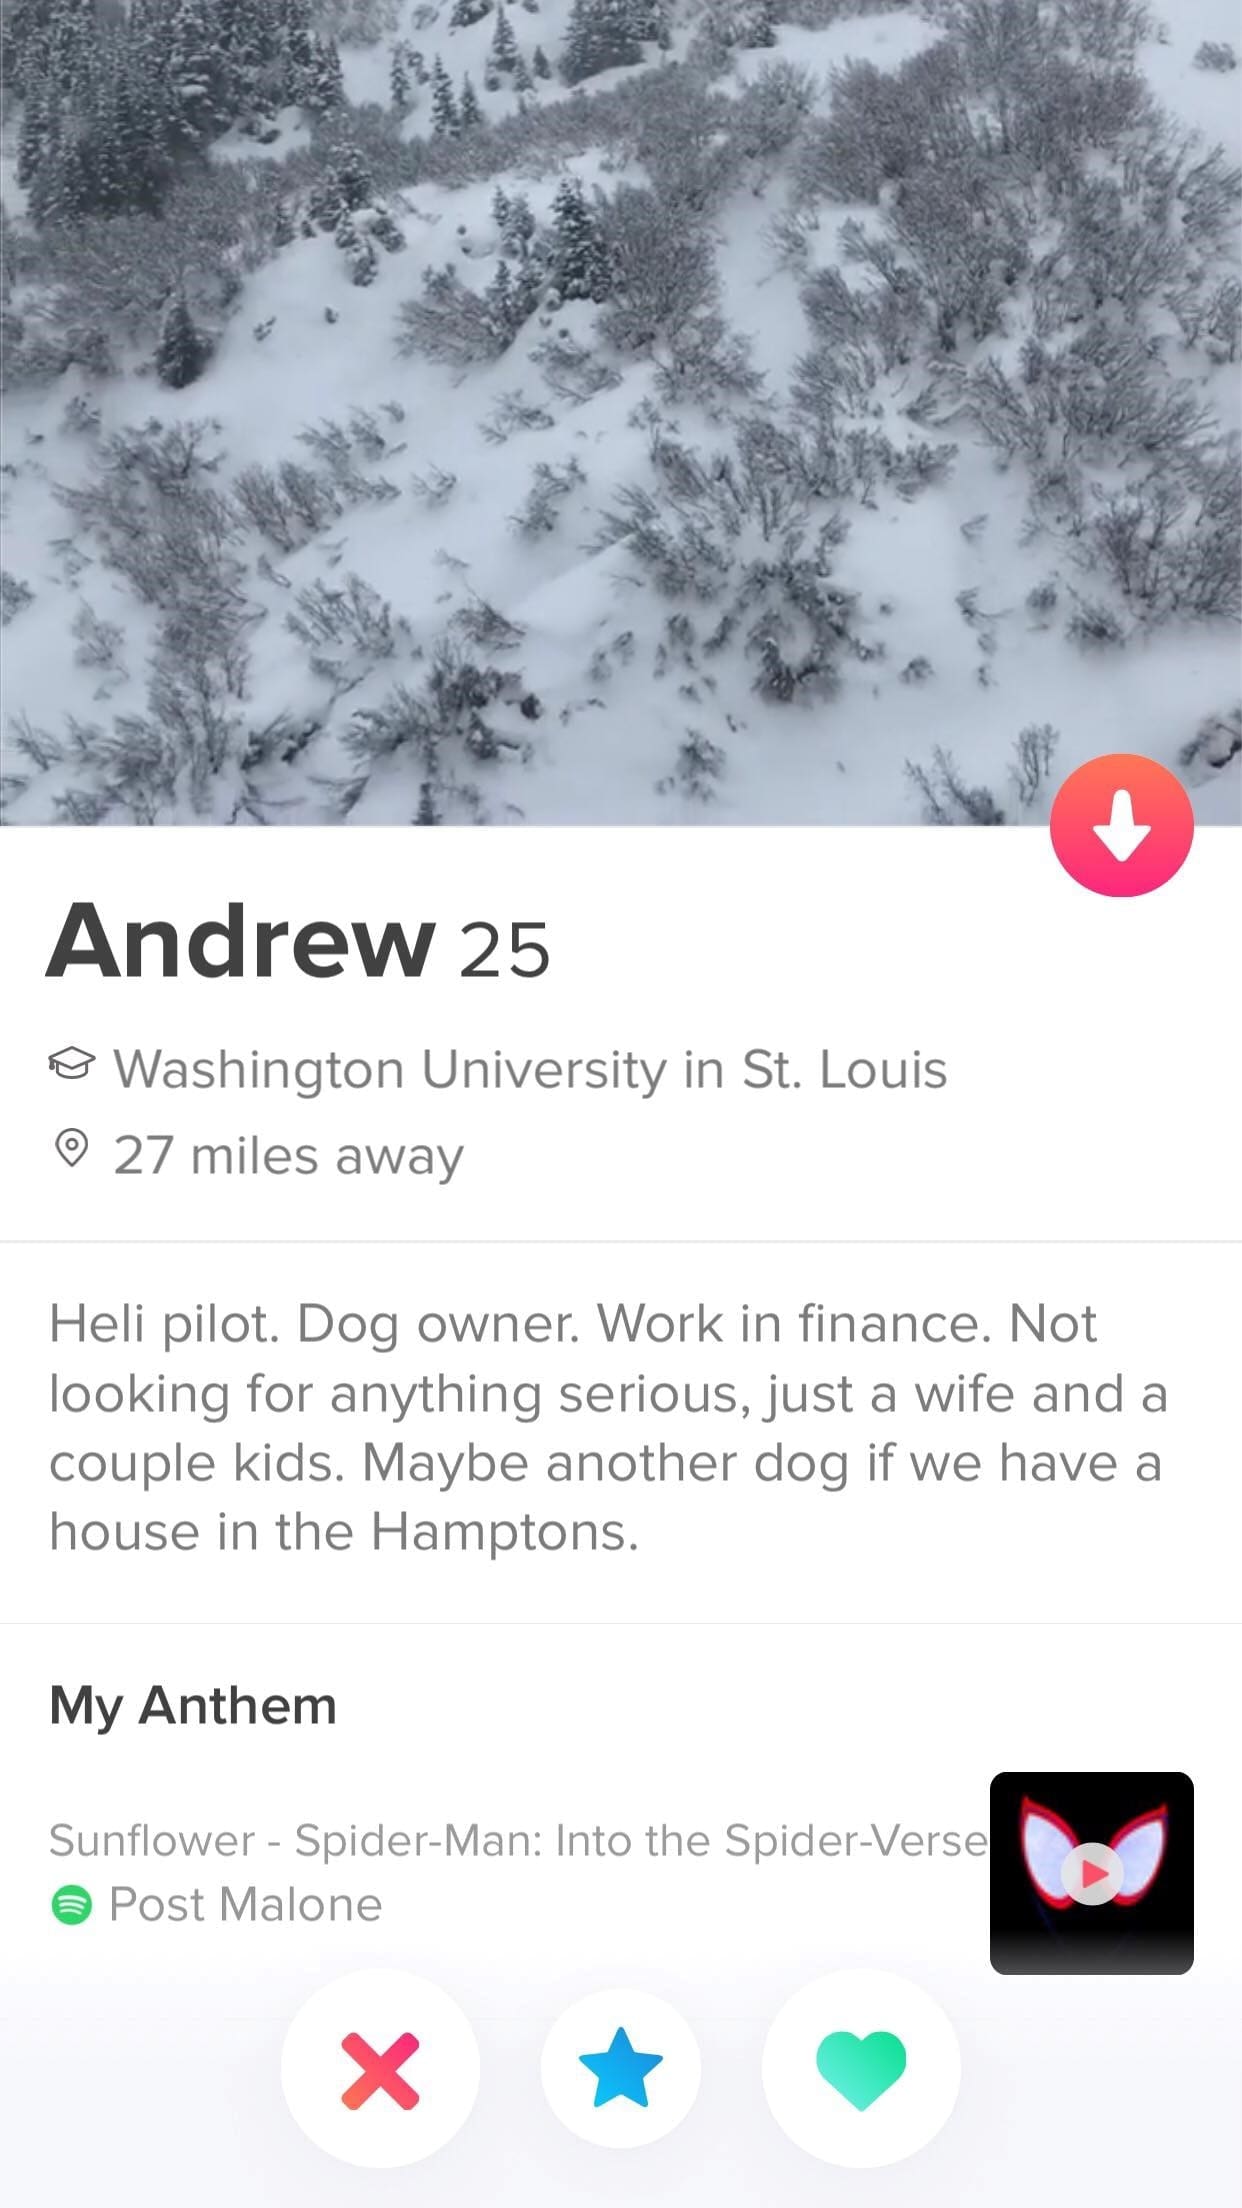 10 Best Tinder Bio Examples for Guys (To Make Her Swipe Right) The